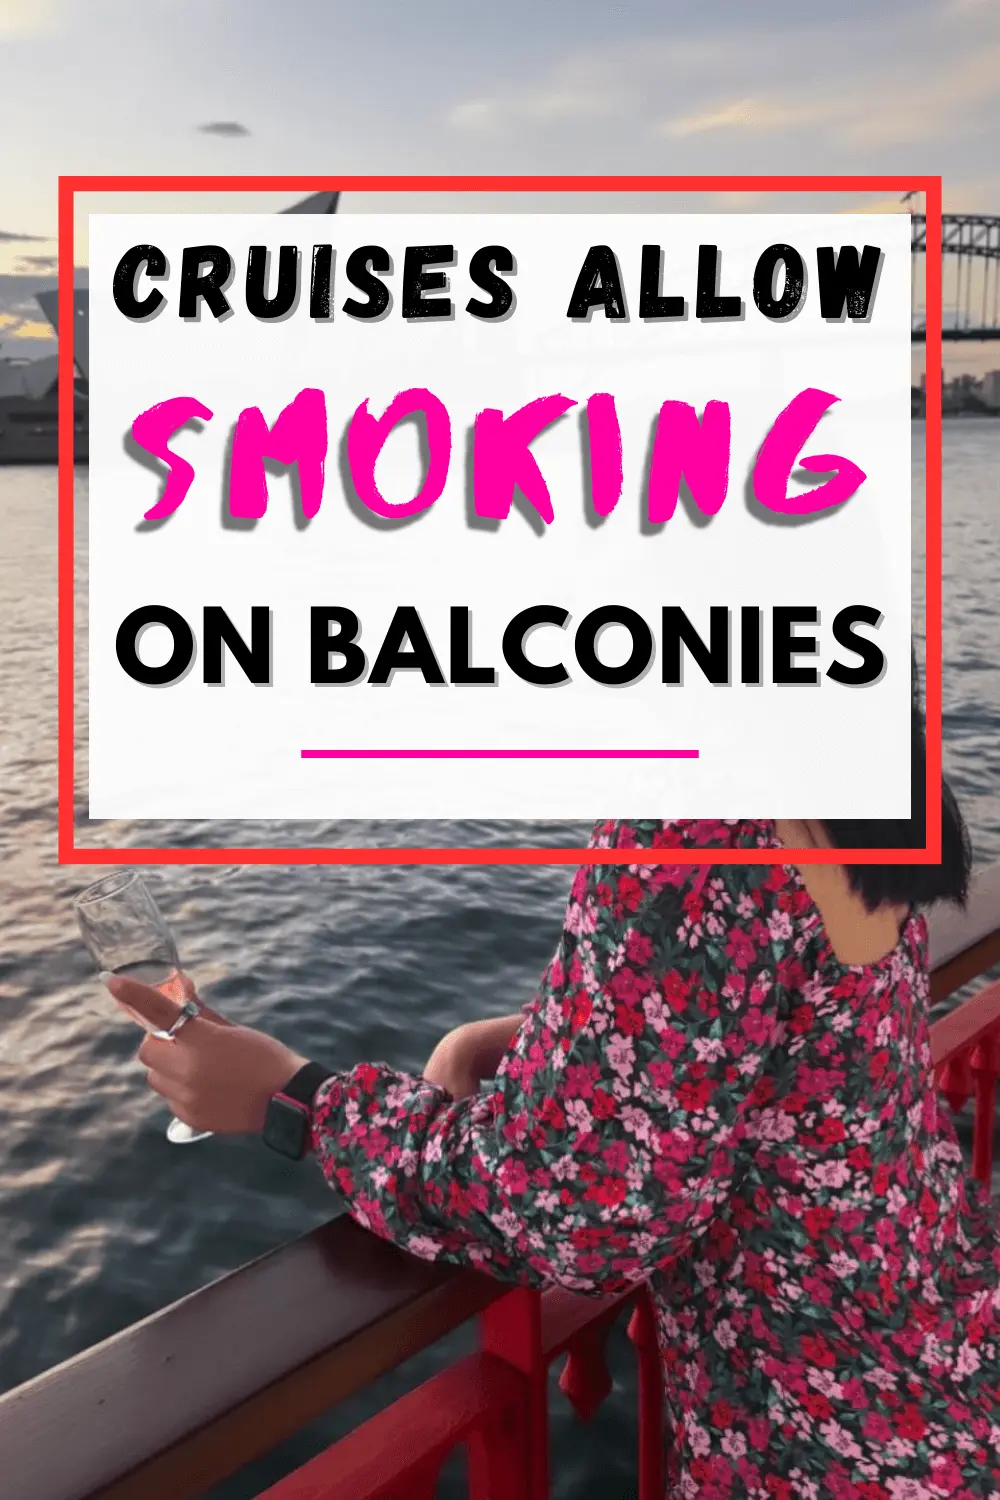 Cruise Lines That Let You Smoke On Balconies